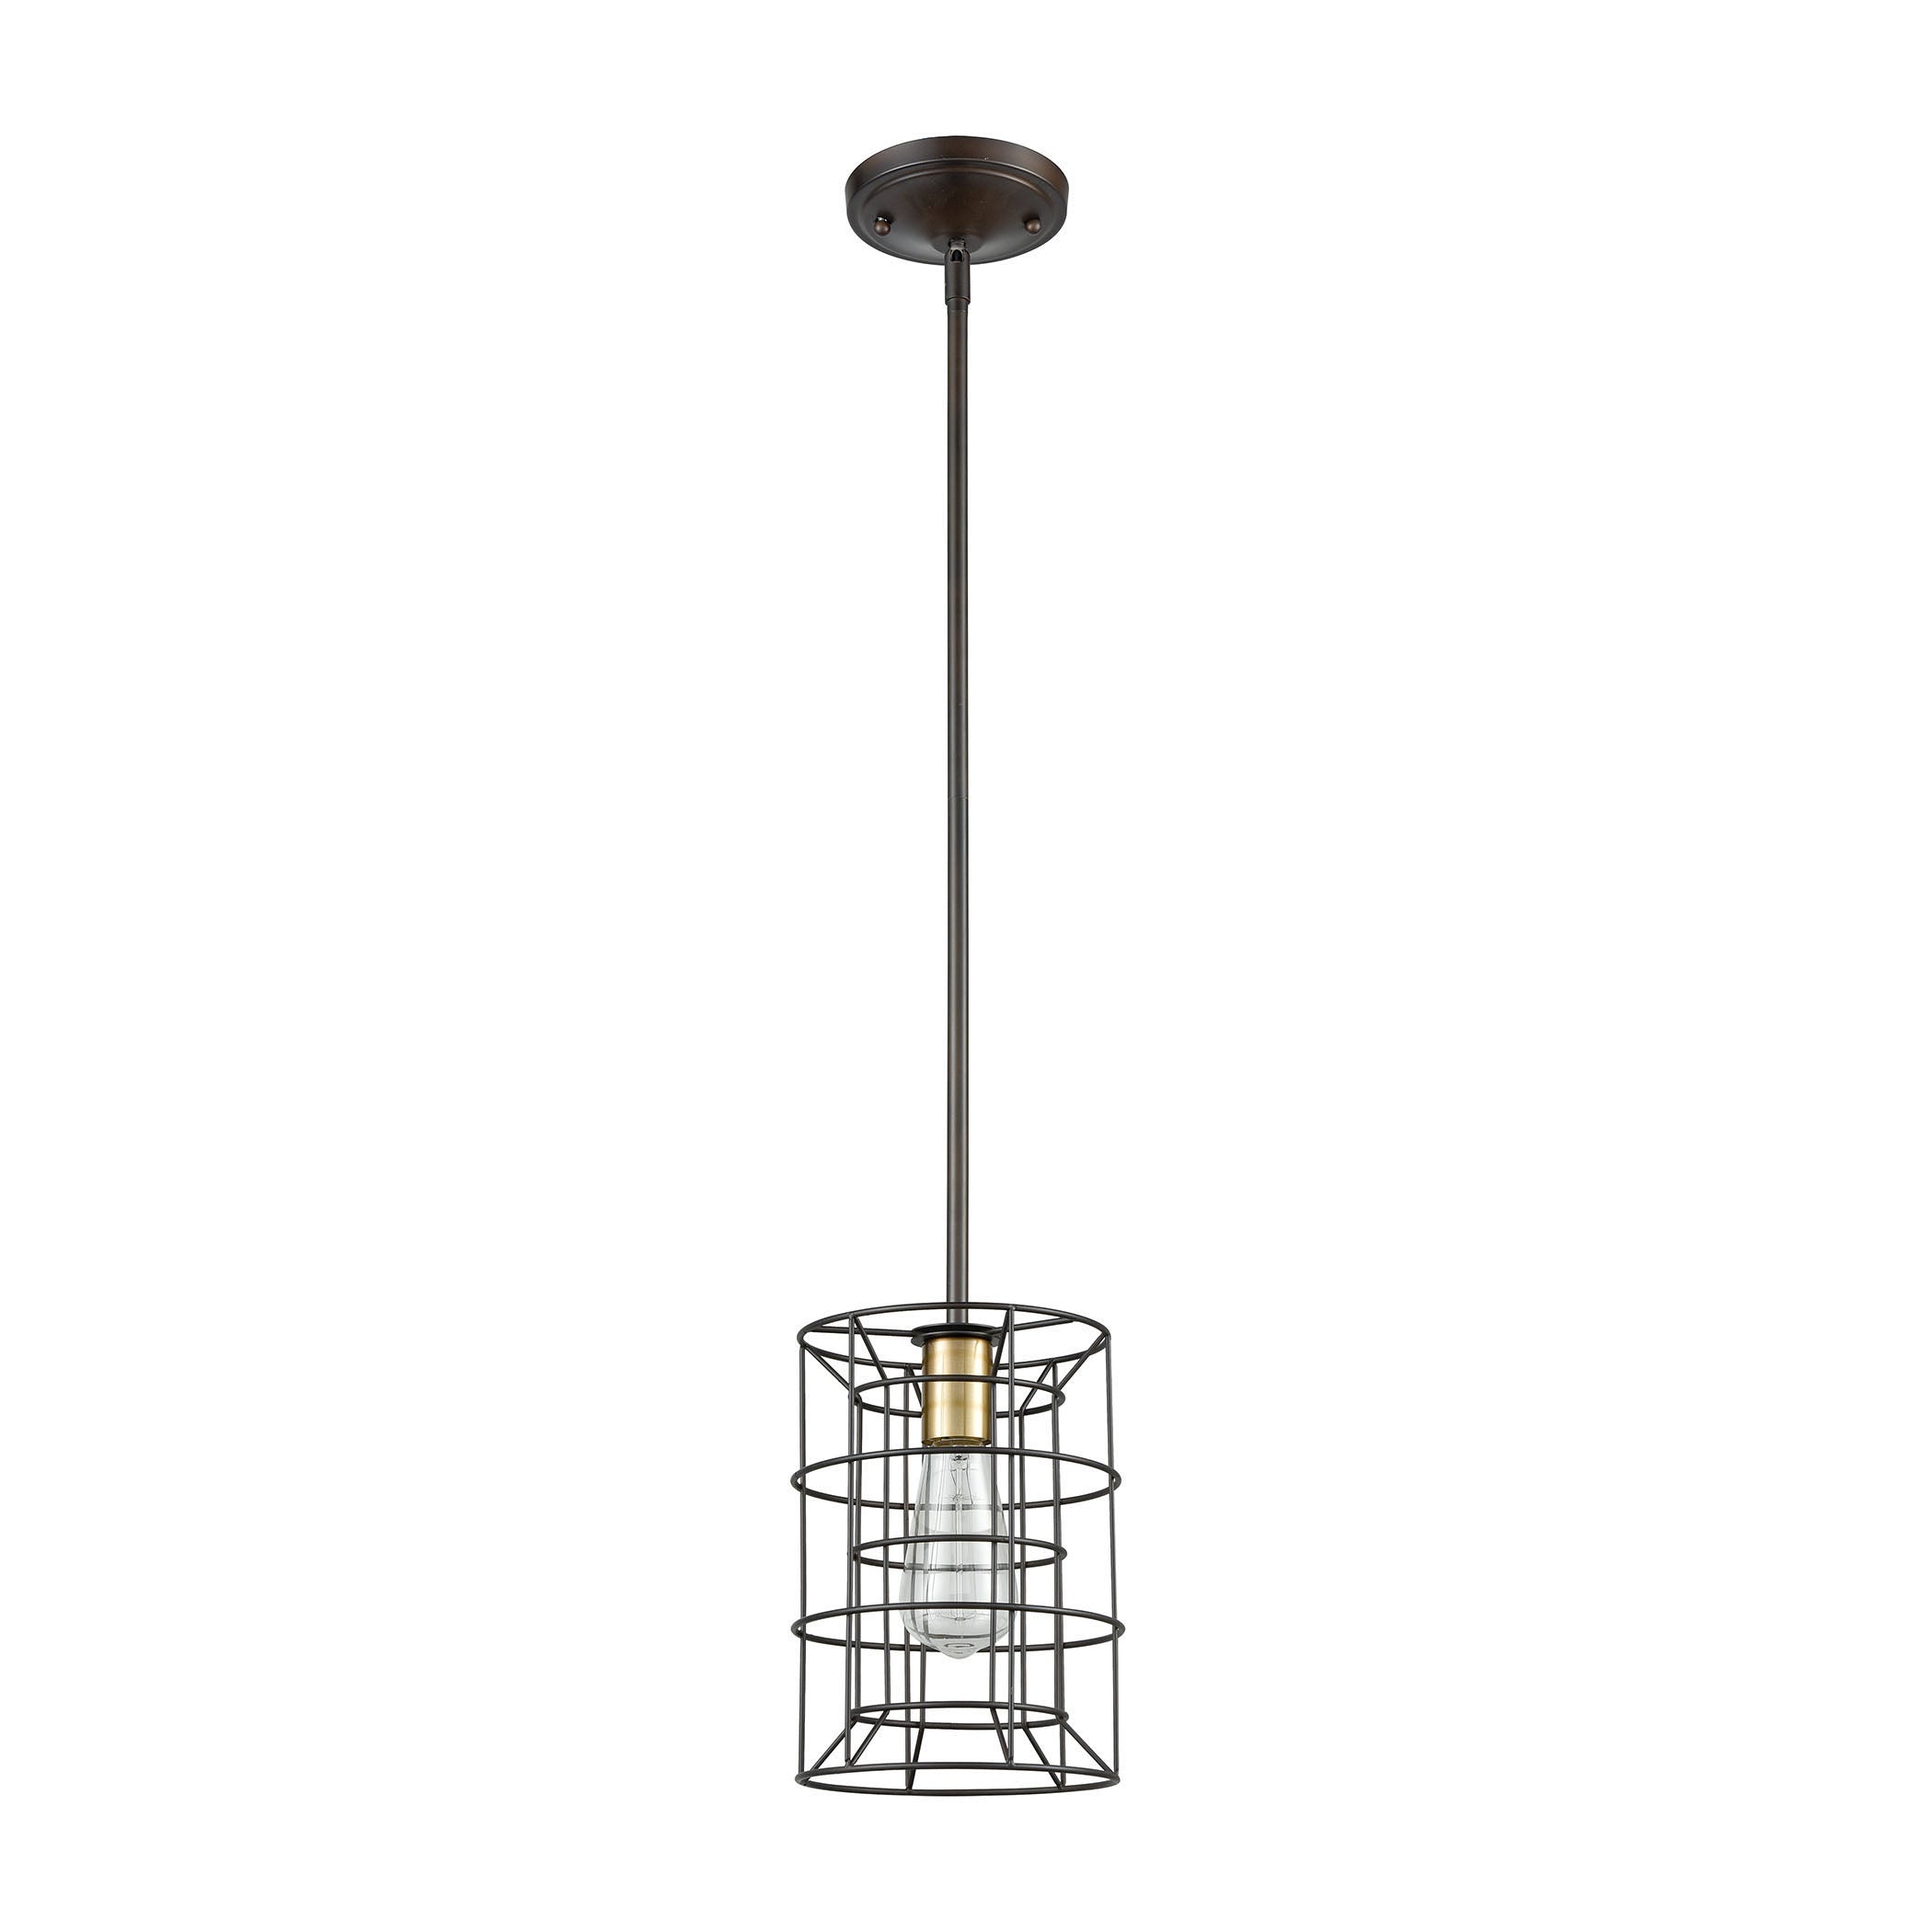 ELK Lighting 81384/1 Dayton 1-Light Mini Pendant in Oil Rubbed Bronze and Satin Brass with Wire Cage